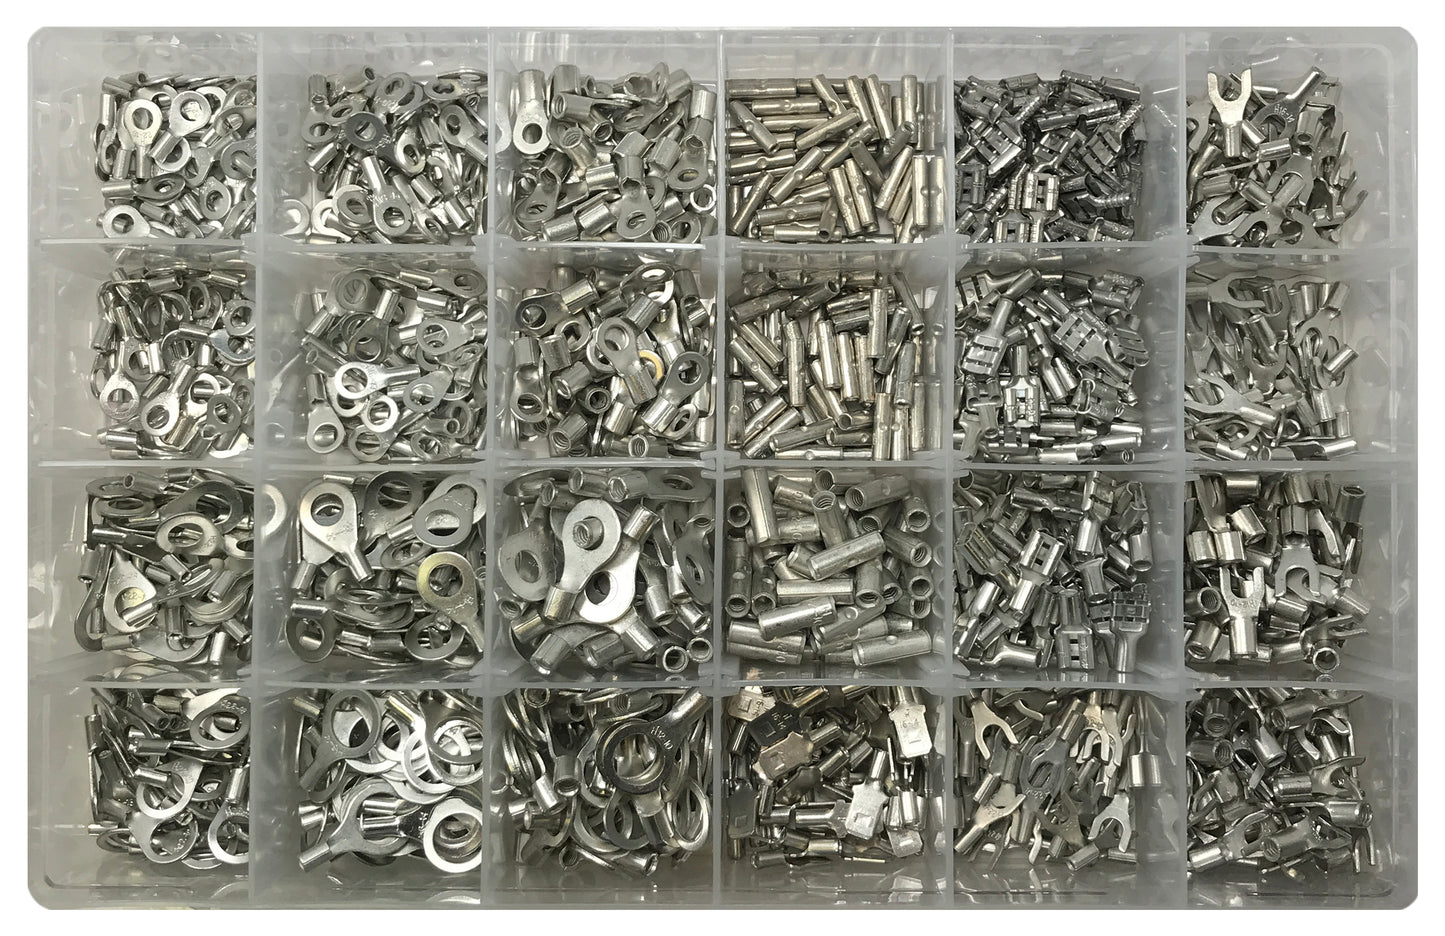 Non-Insulated Wire Terminal Connector Assortment Kit - 1200 Pieces